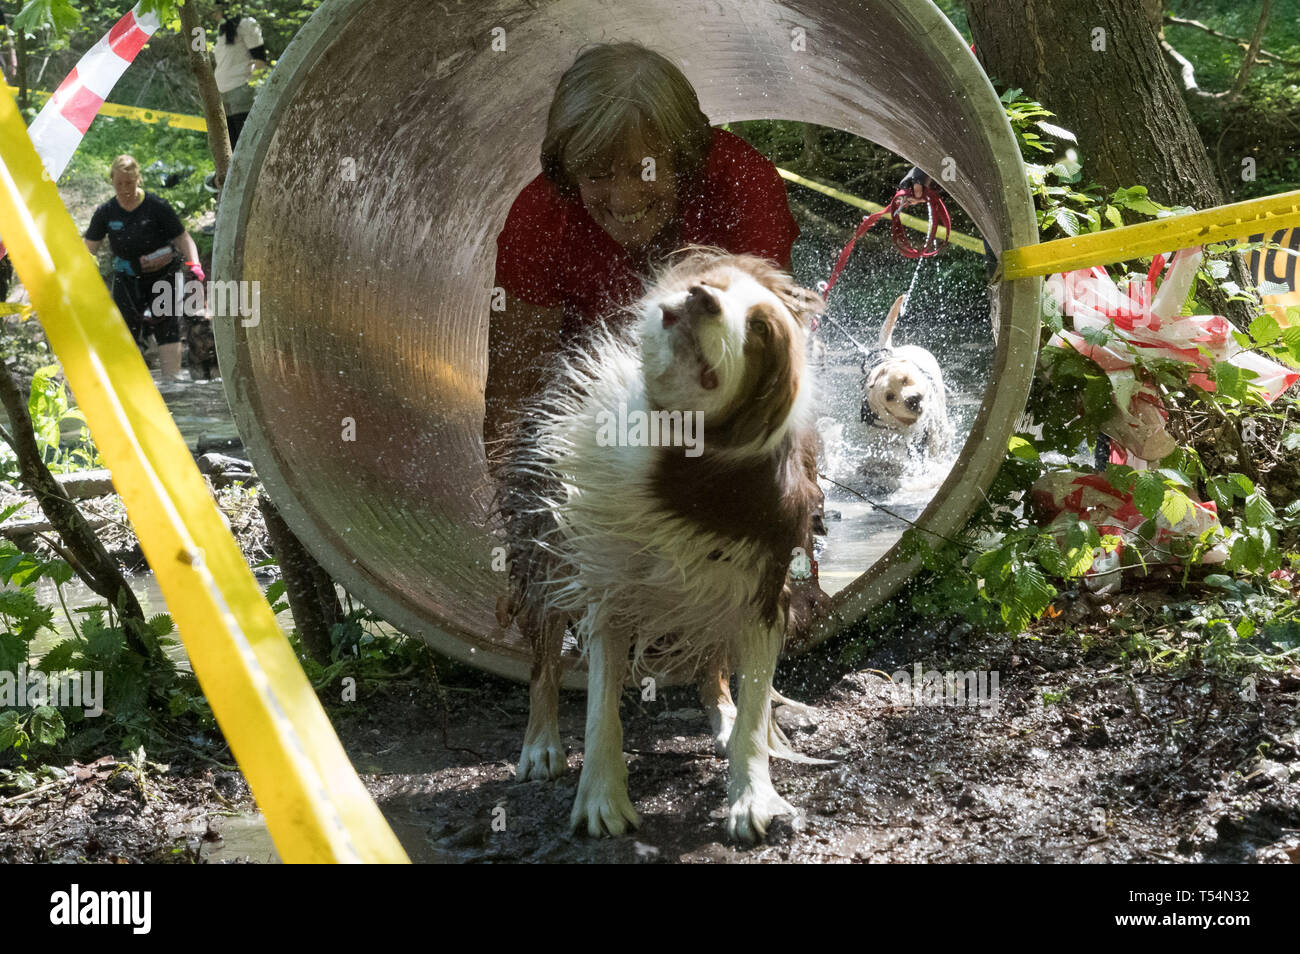 Nagymaros, Hungary. 20th Apr, 2019. Participants compete in the Hard Dog Race extreme obstacle course race near Nagymaros, Hungary on April 20, 2019. Credit: Xinhua/Alamy Live News Stock Photo